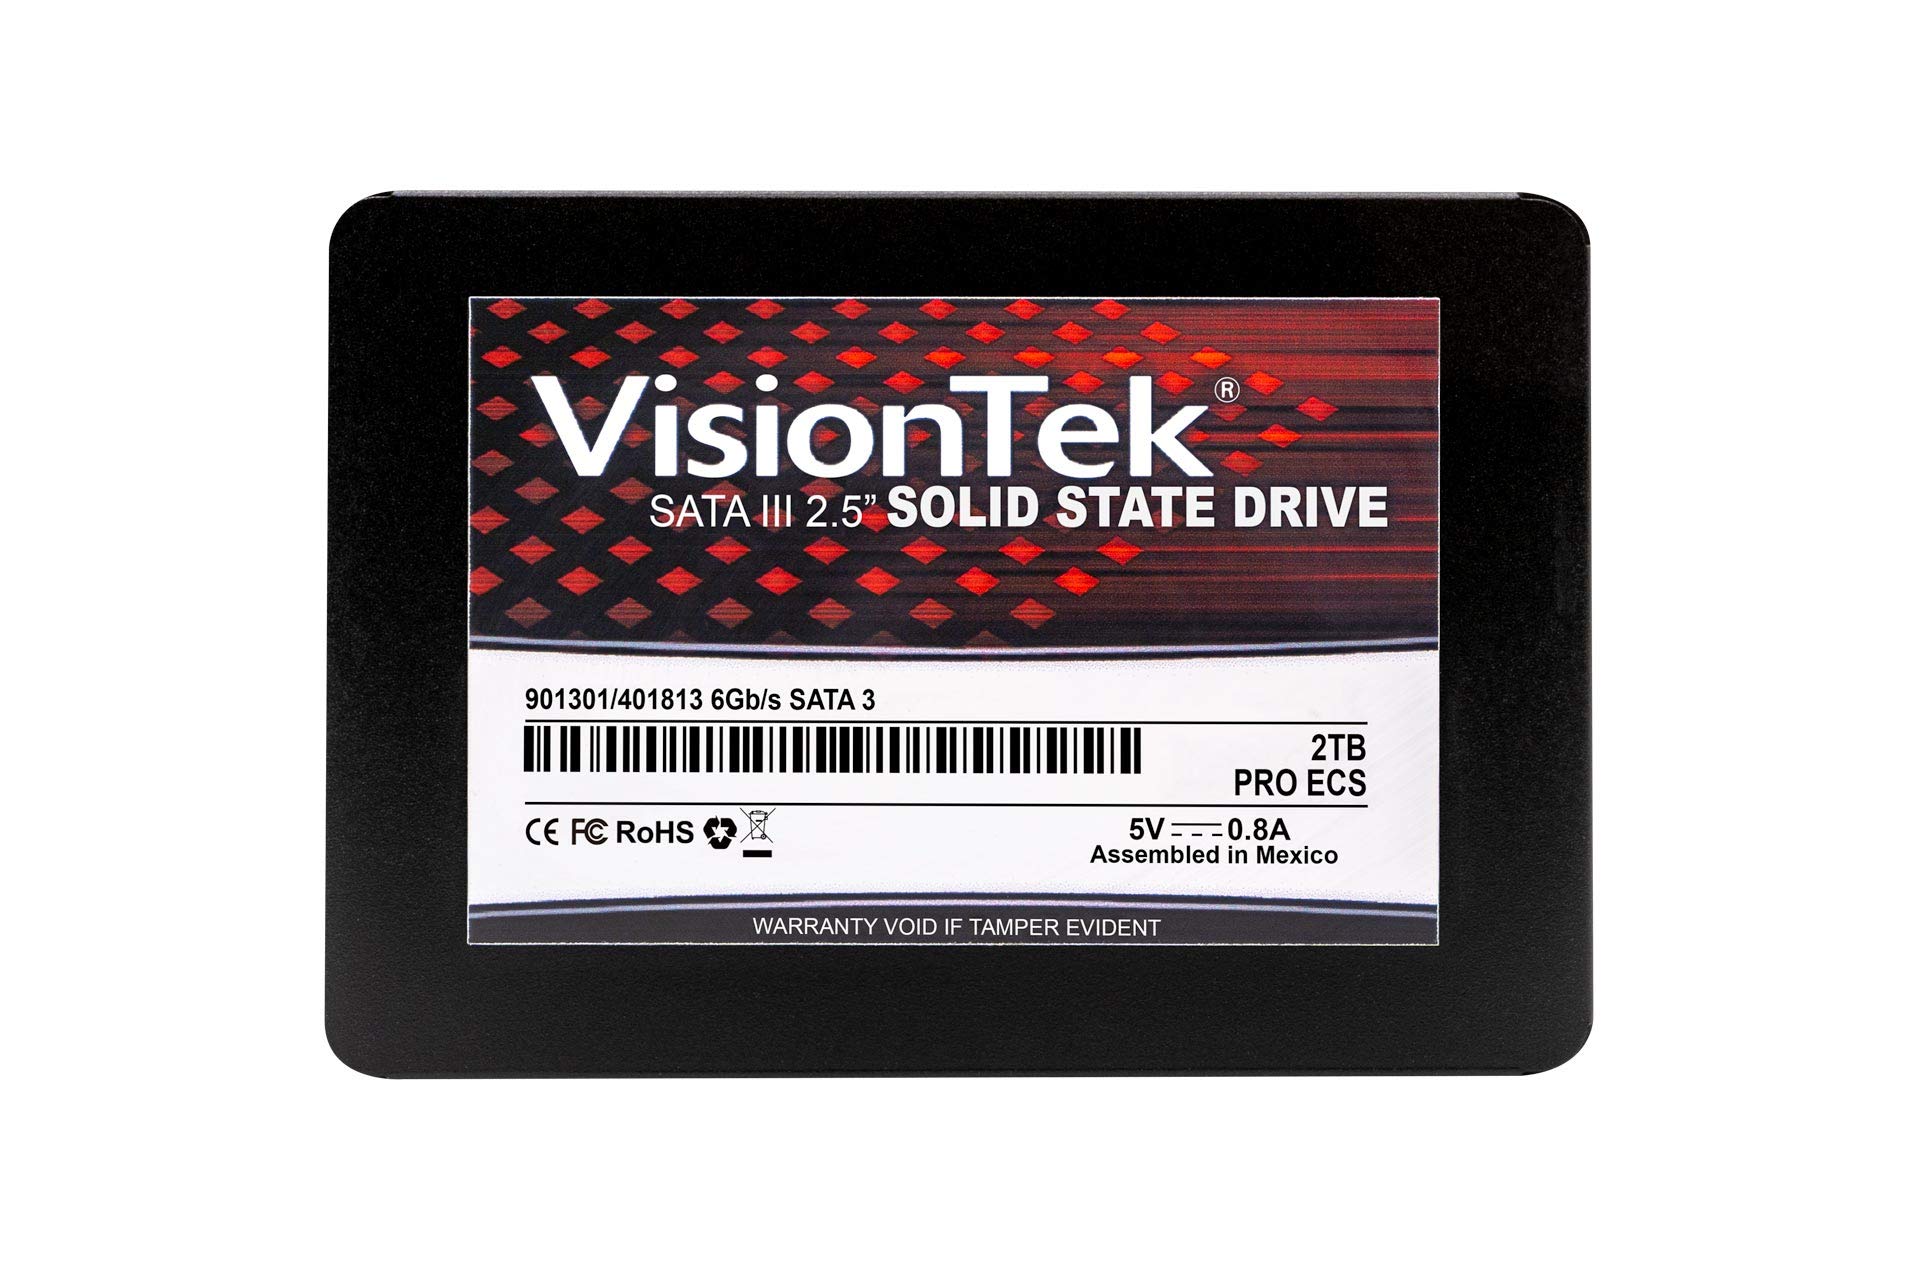 VisionTek 2TB PRO ECS 7mm 2.5 Inch SATA III Internal Solid State Drive with 3D TLC NAND Technology for Desktop Computers Lap